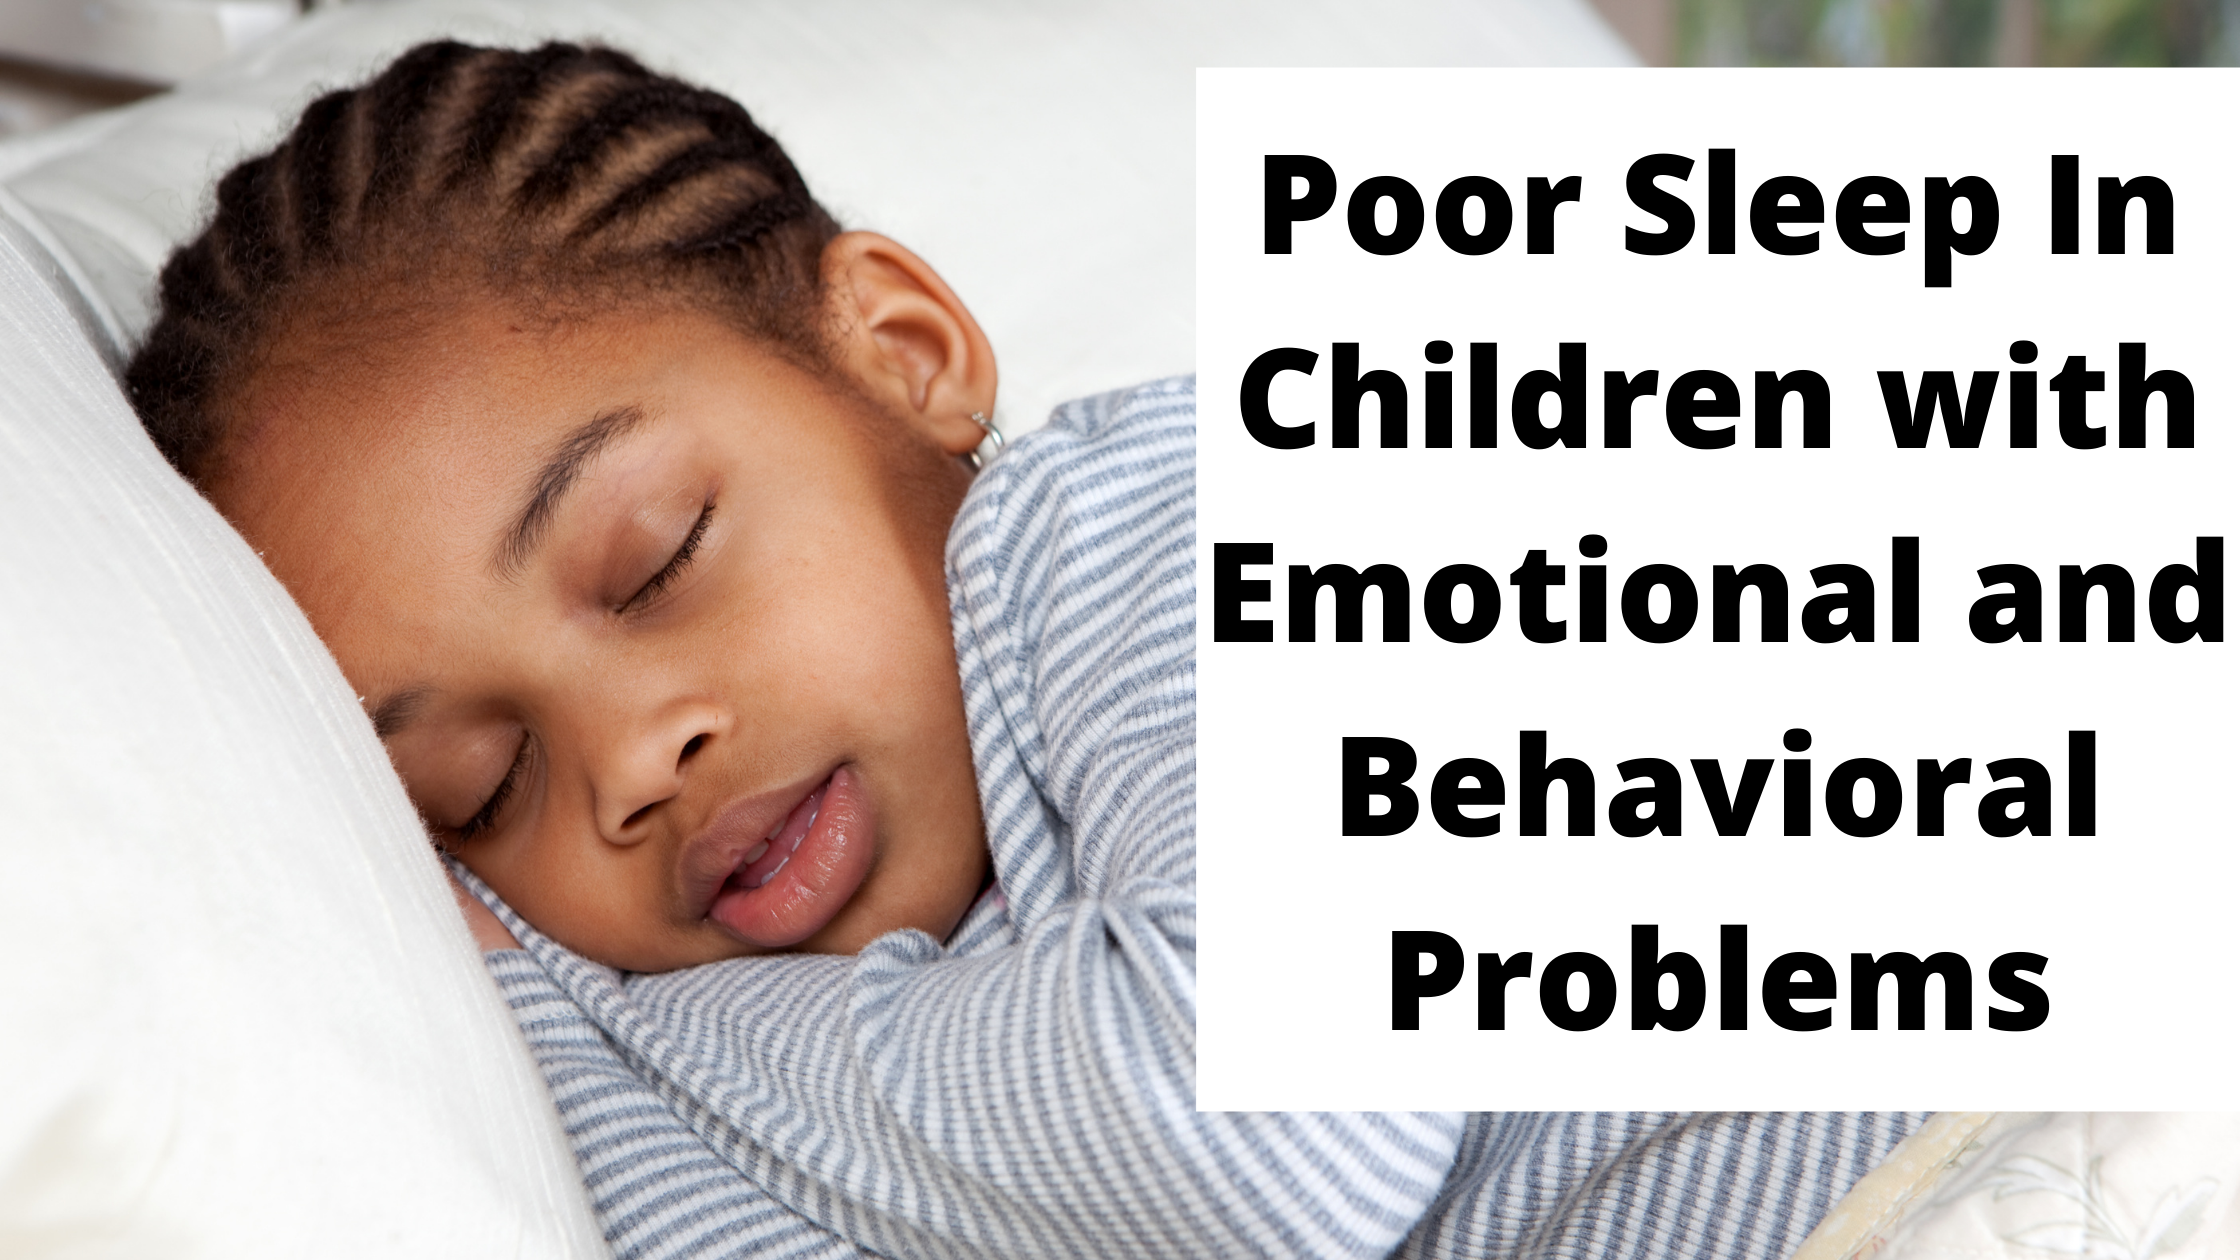 Poor Sleep In Children with Emotional and Behavioral Problems